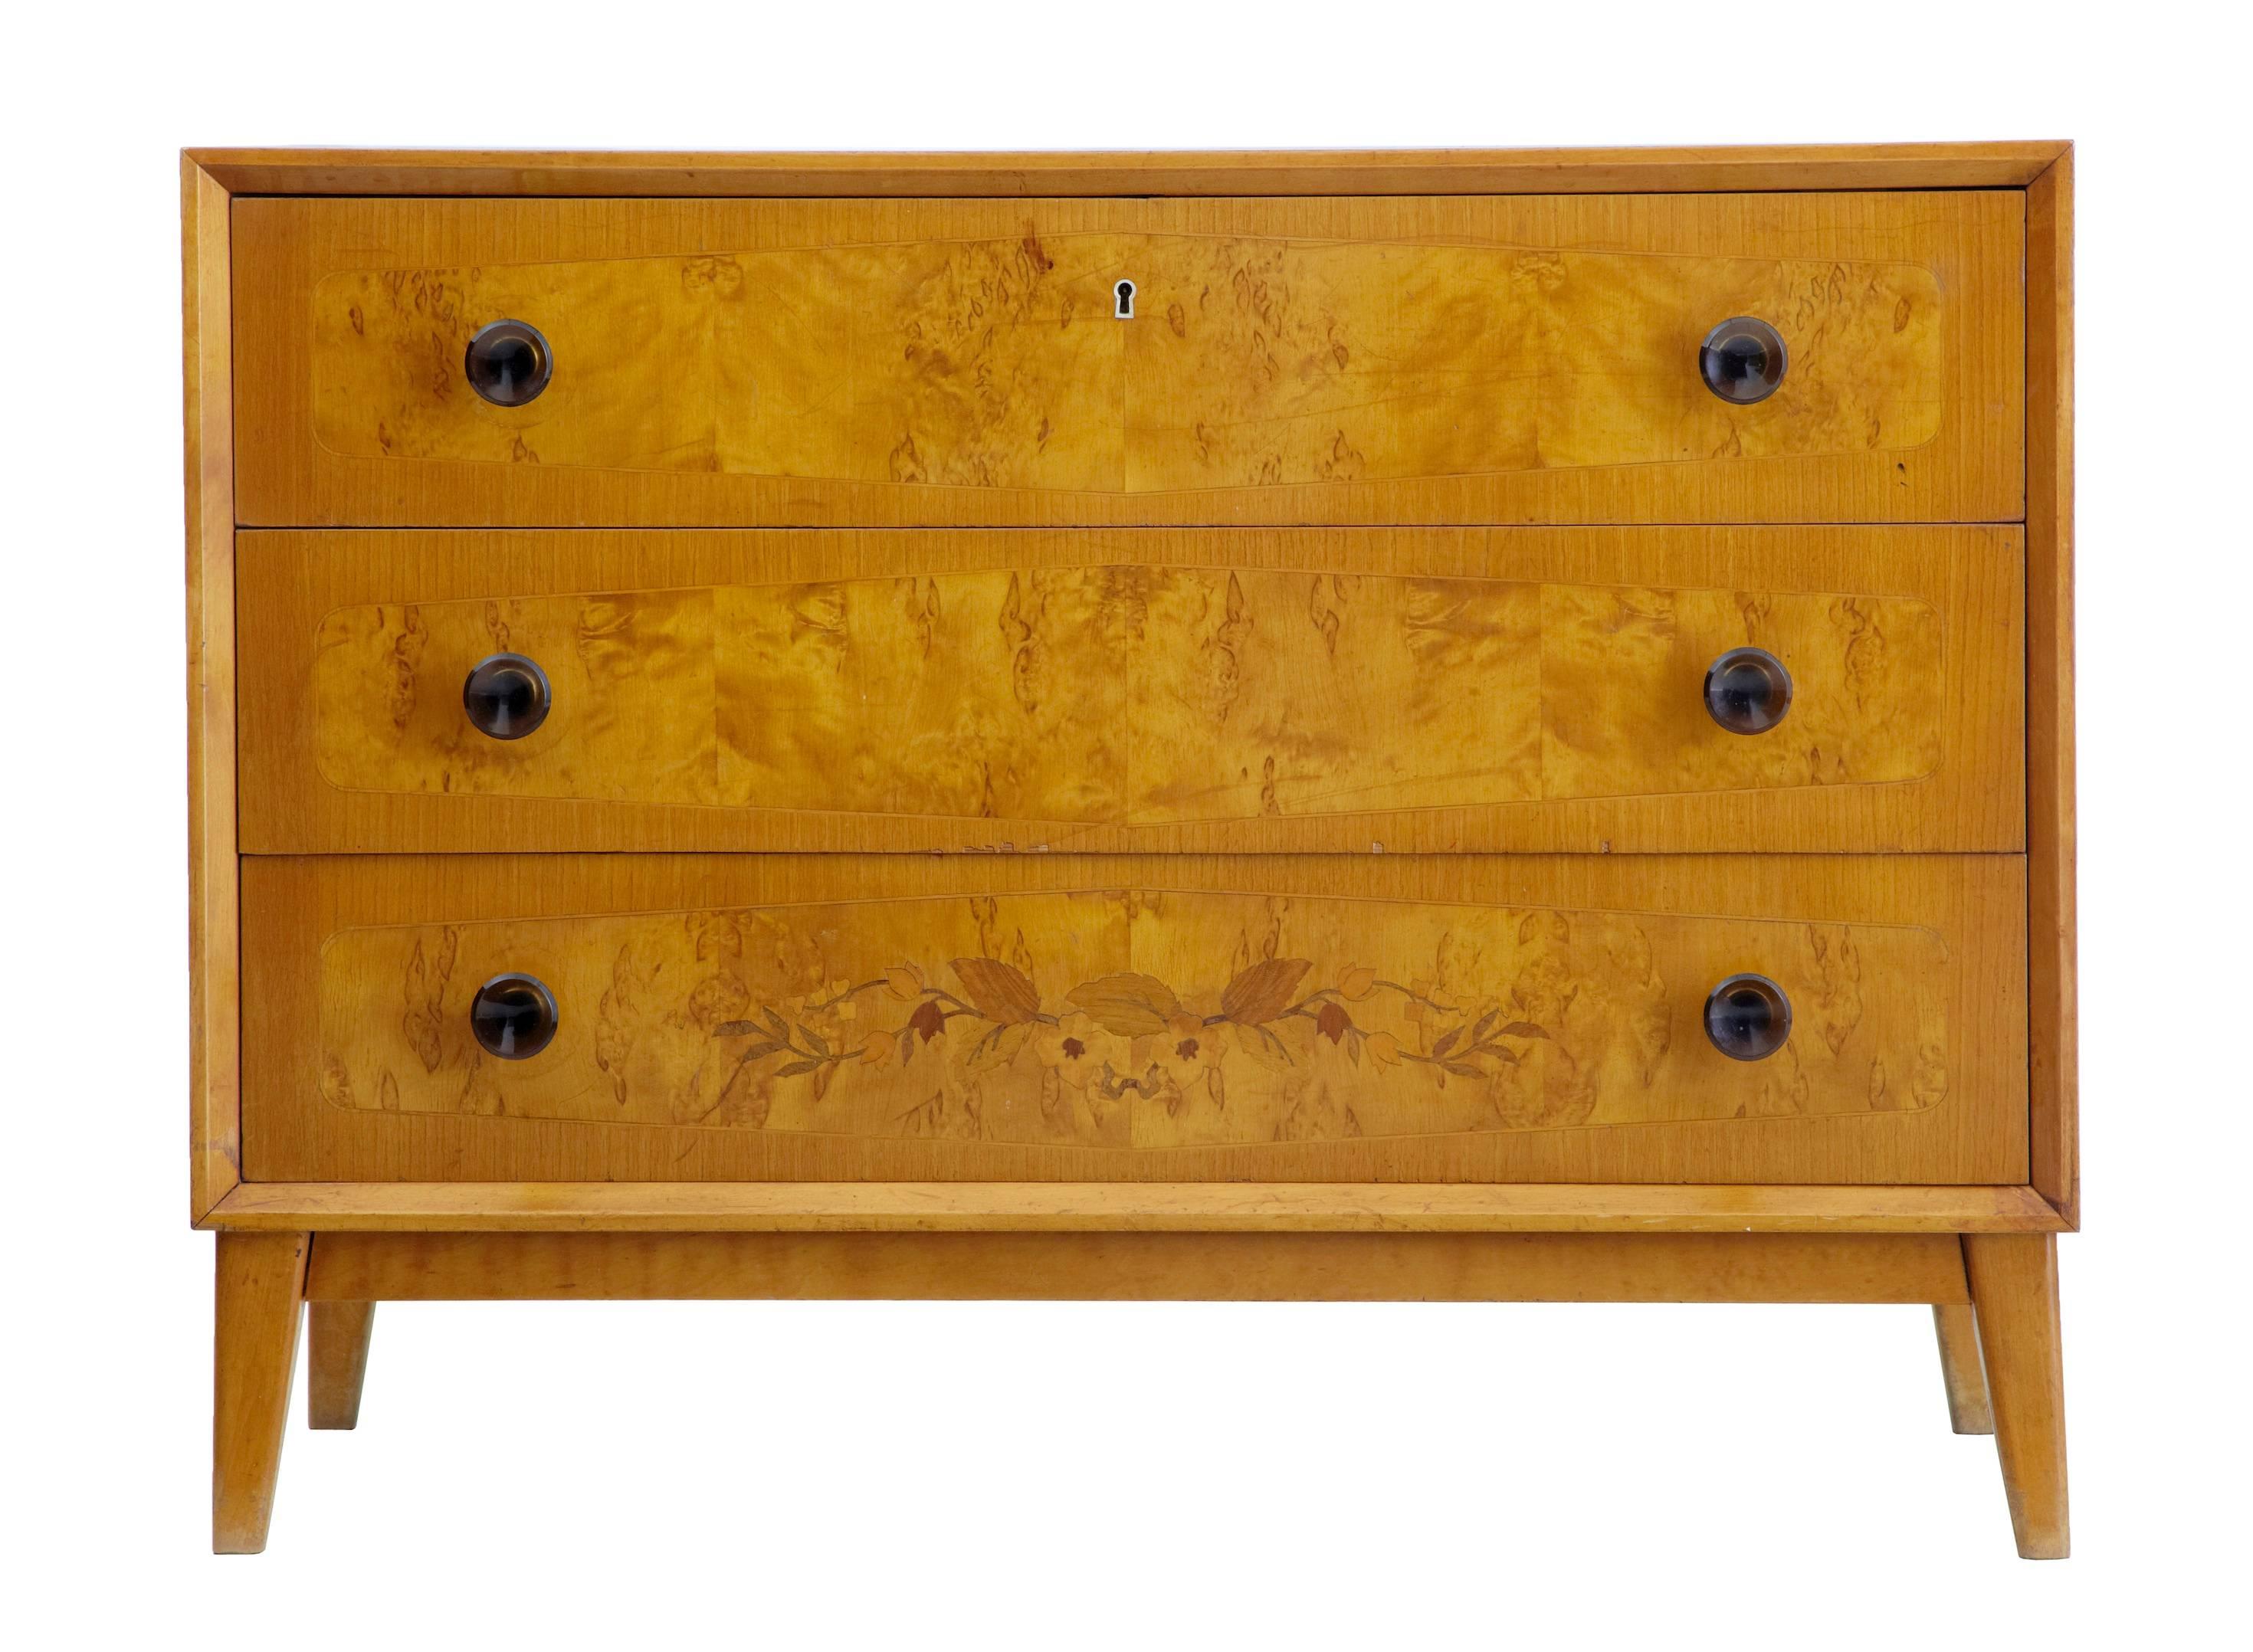 Three-drawer chest with inlaid bottom drawer, circa 1950.
Crossbanded and strung drawer fronts, with faux colored glass handles.
Standing on tapering legs.
Good color and very stylish.

Minor veneer losses to middle drawer (photographed).
No